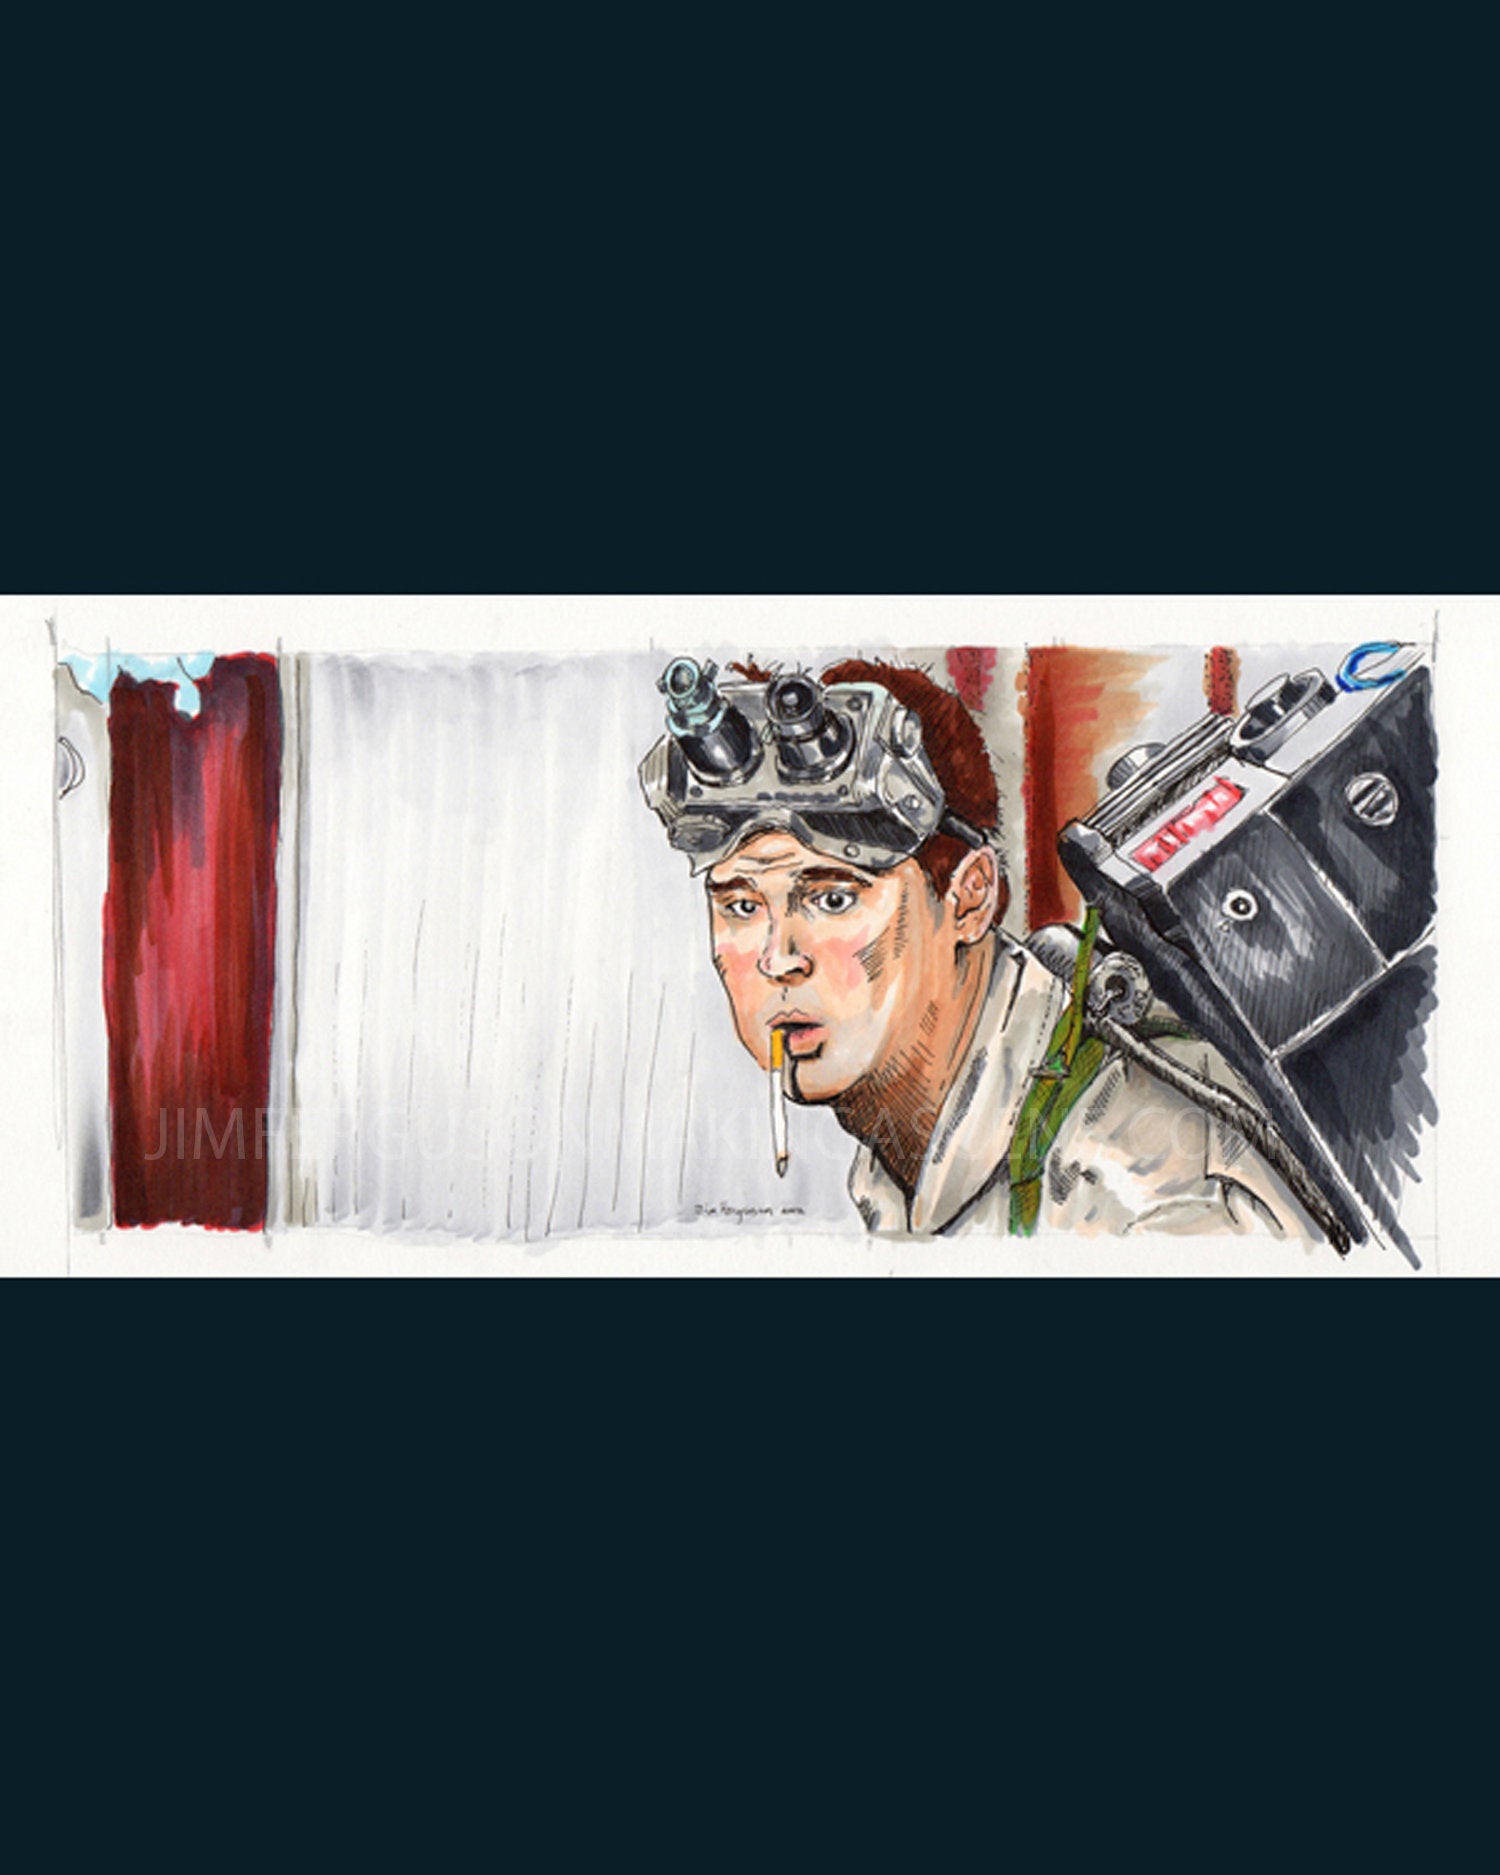 ghostbusters art ray